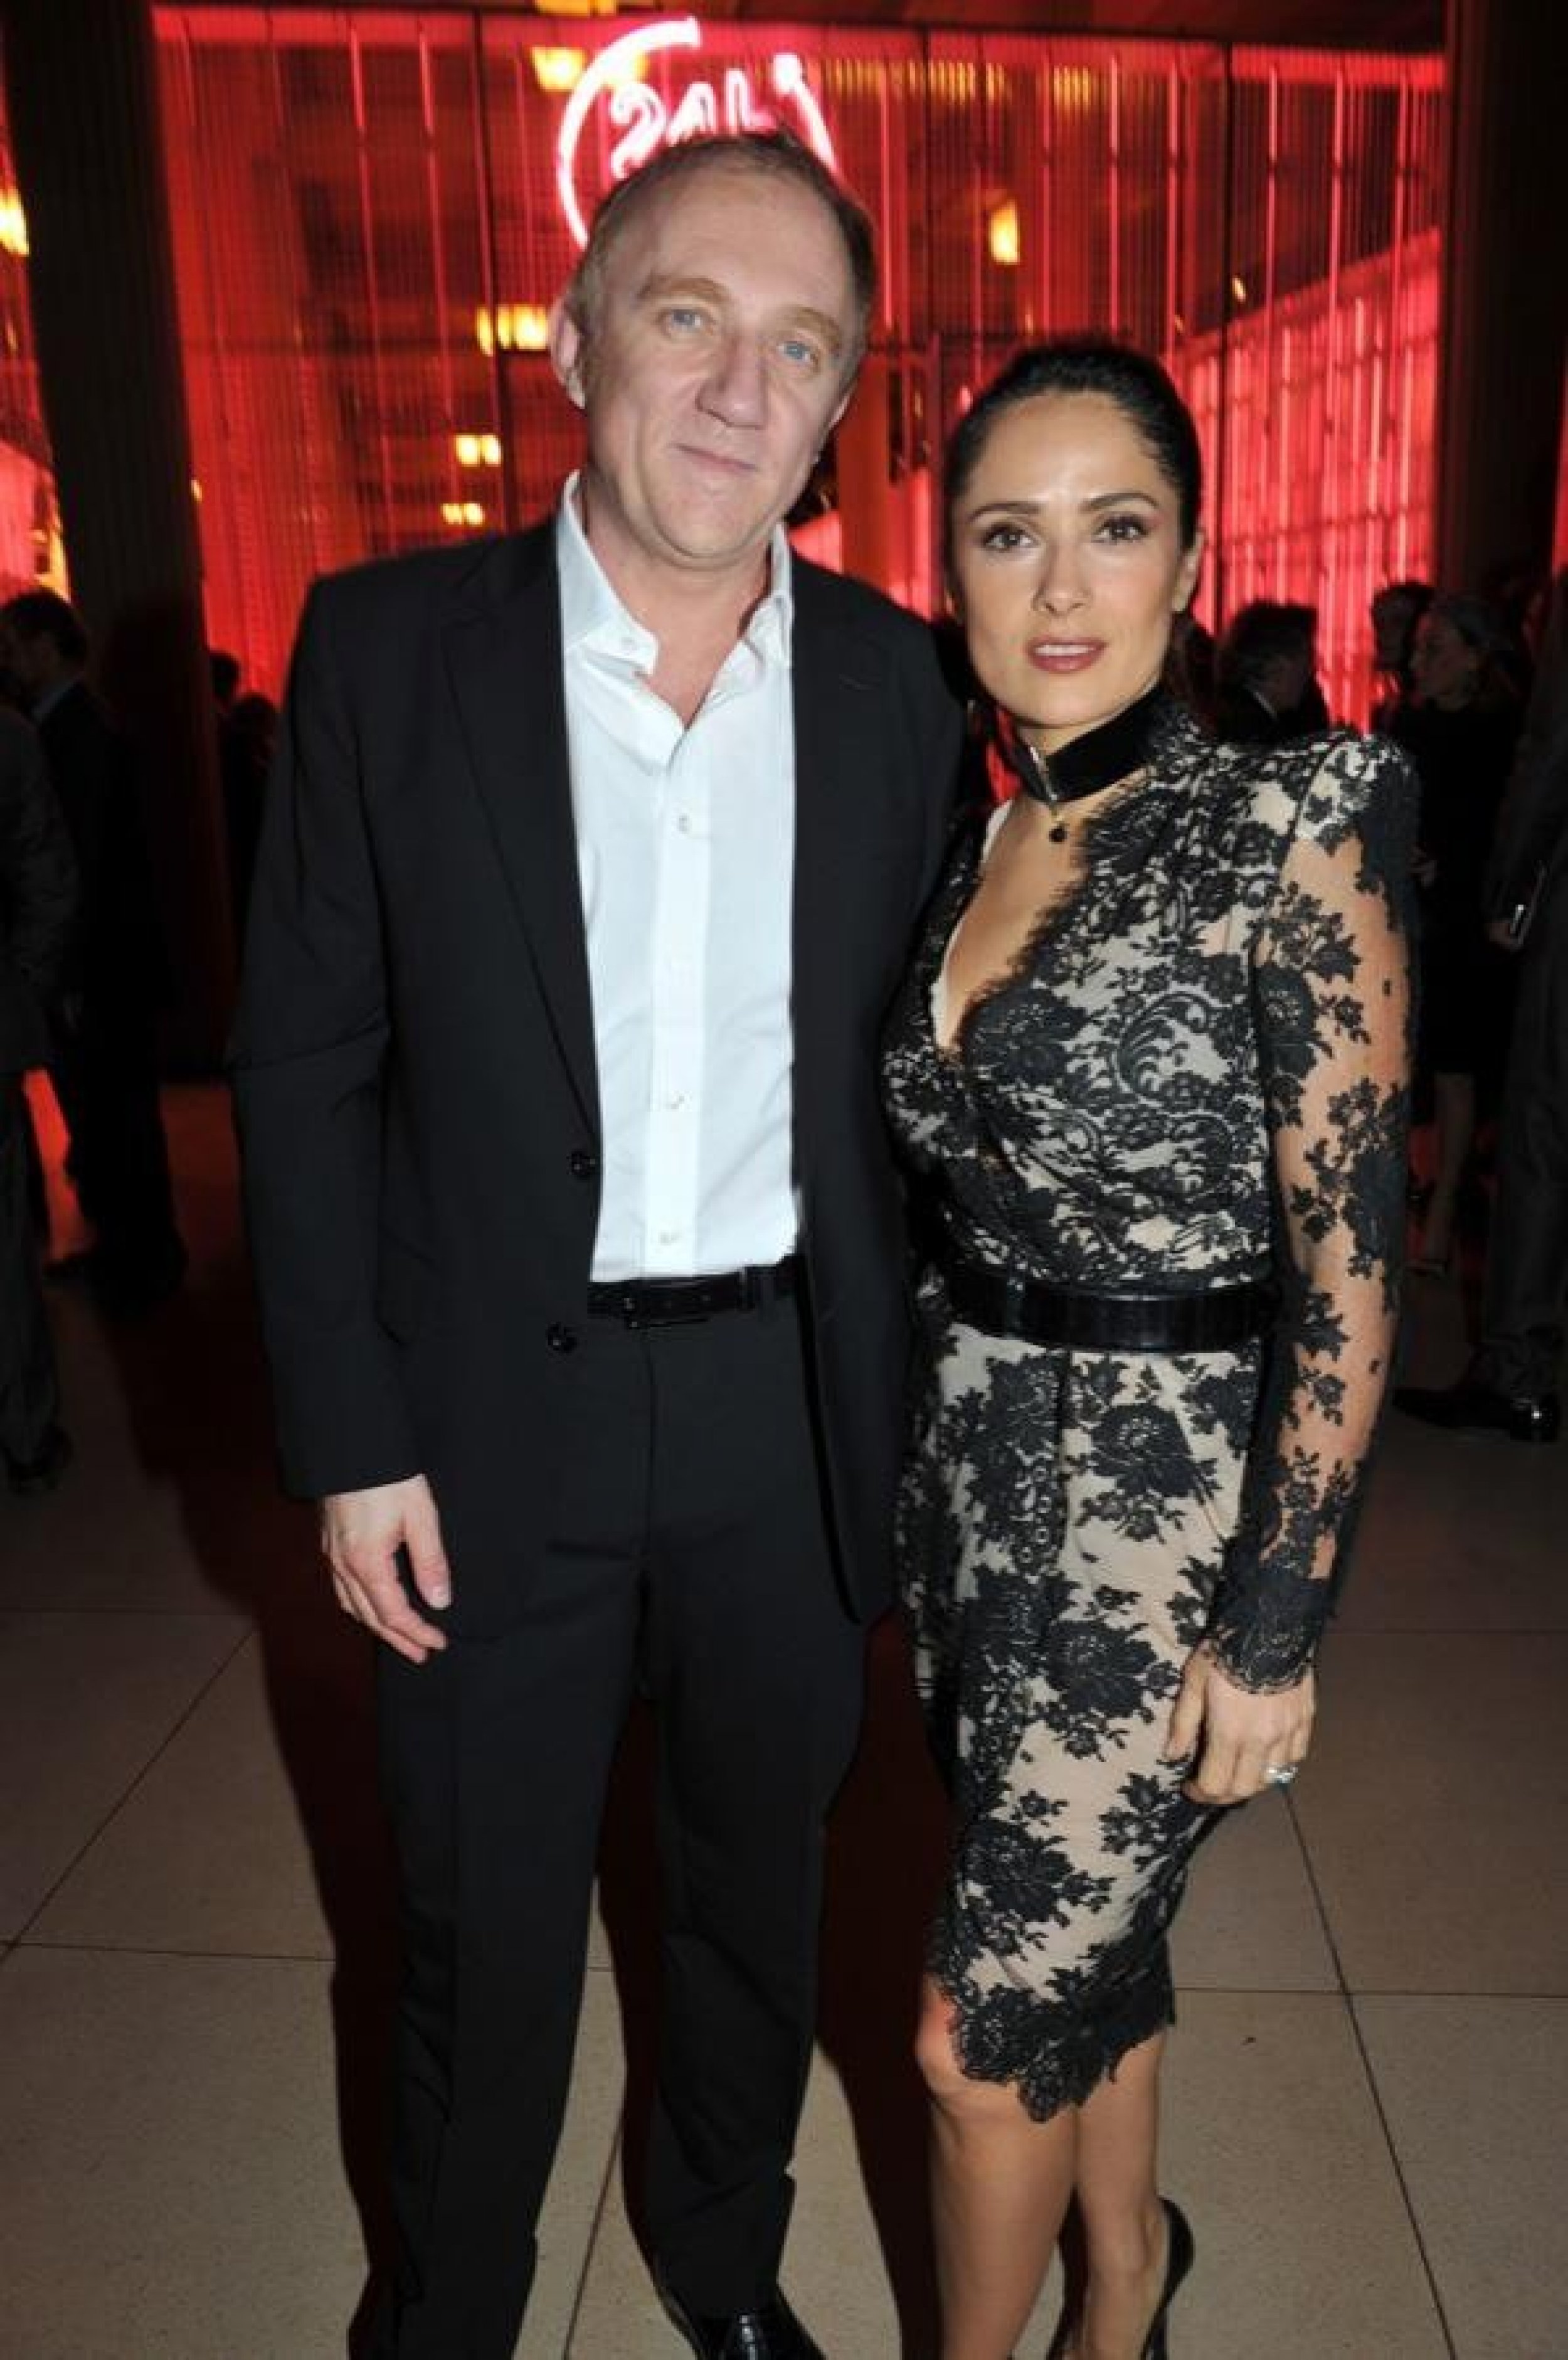 Salma Hayek, Kate Moss and Other Celebs at Prada 24 Hours Museum Gala 